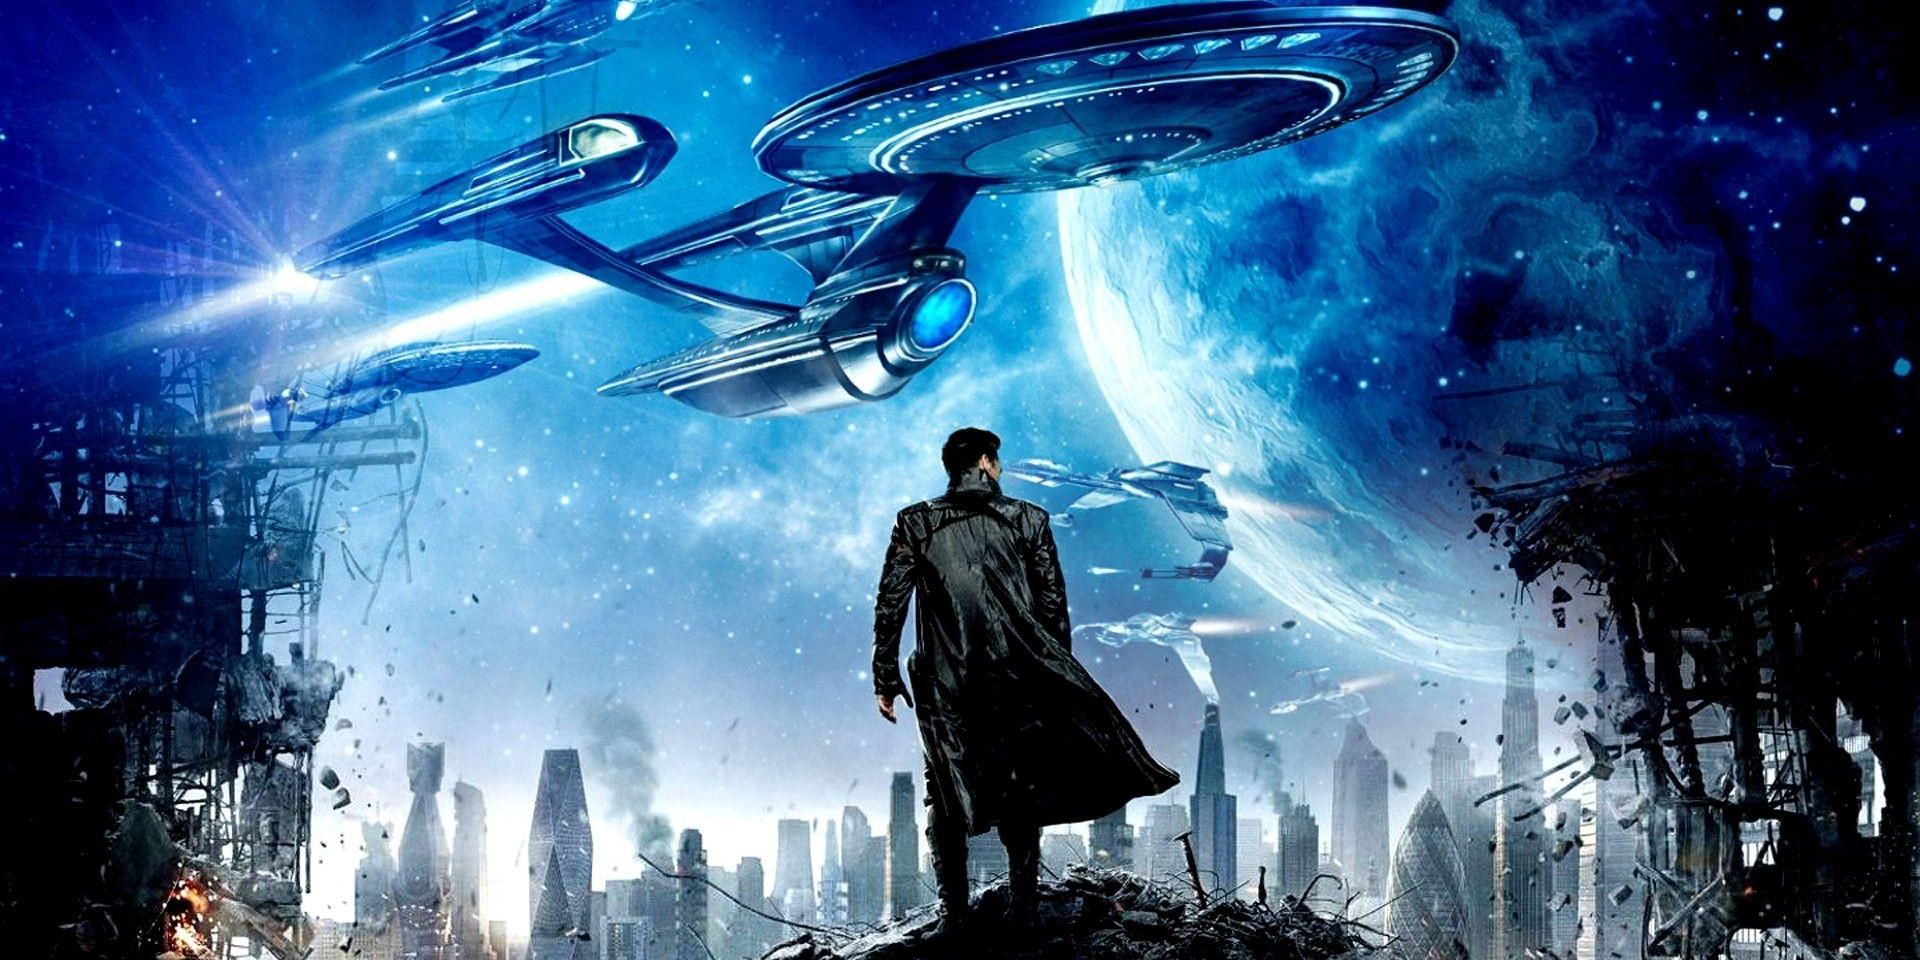 Star Trek man wearing black coat standing on rubbles with the USS Enterprise flying in background